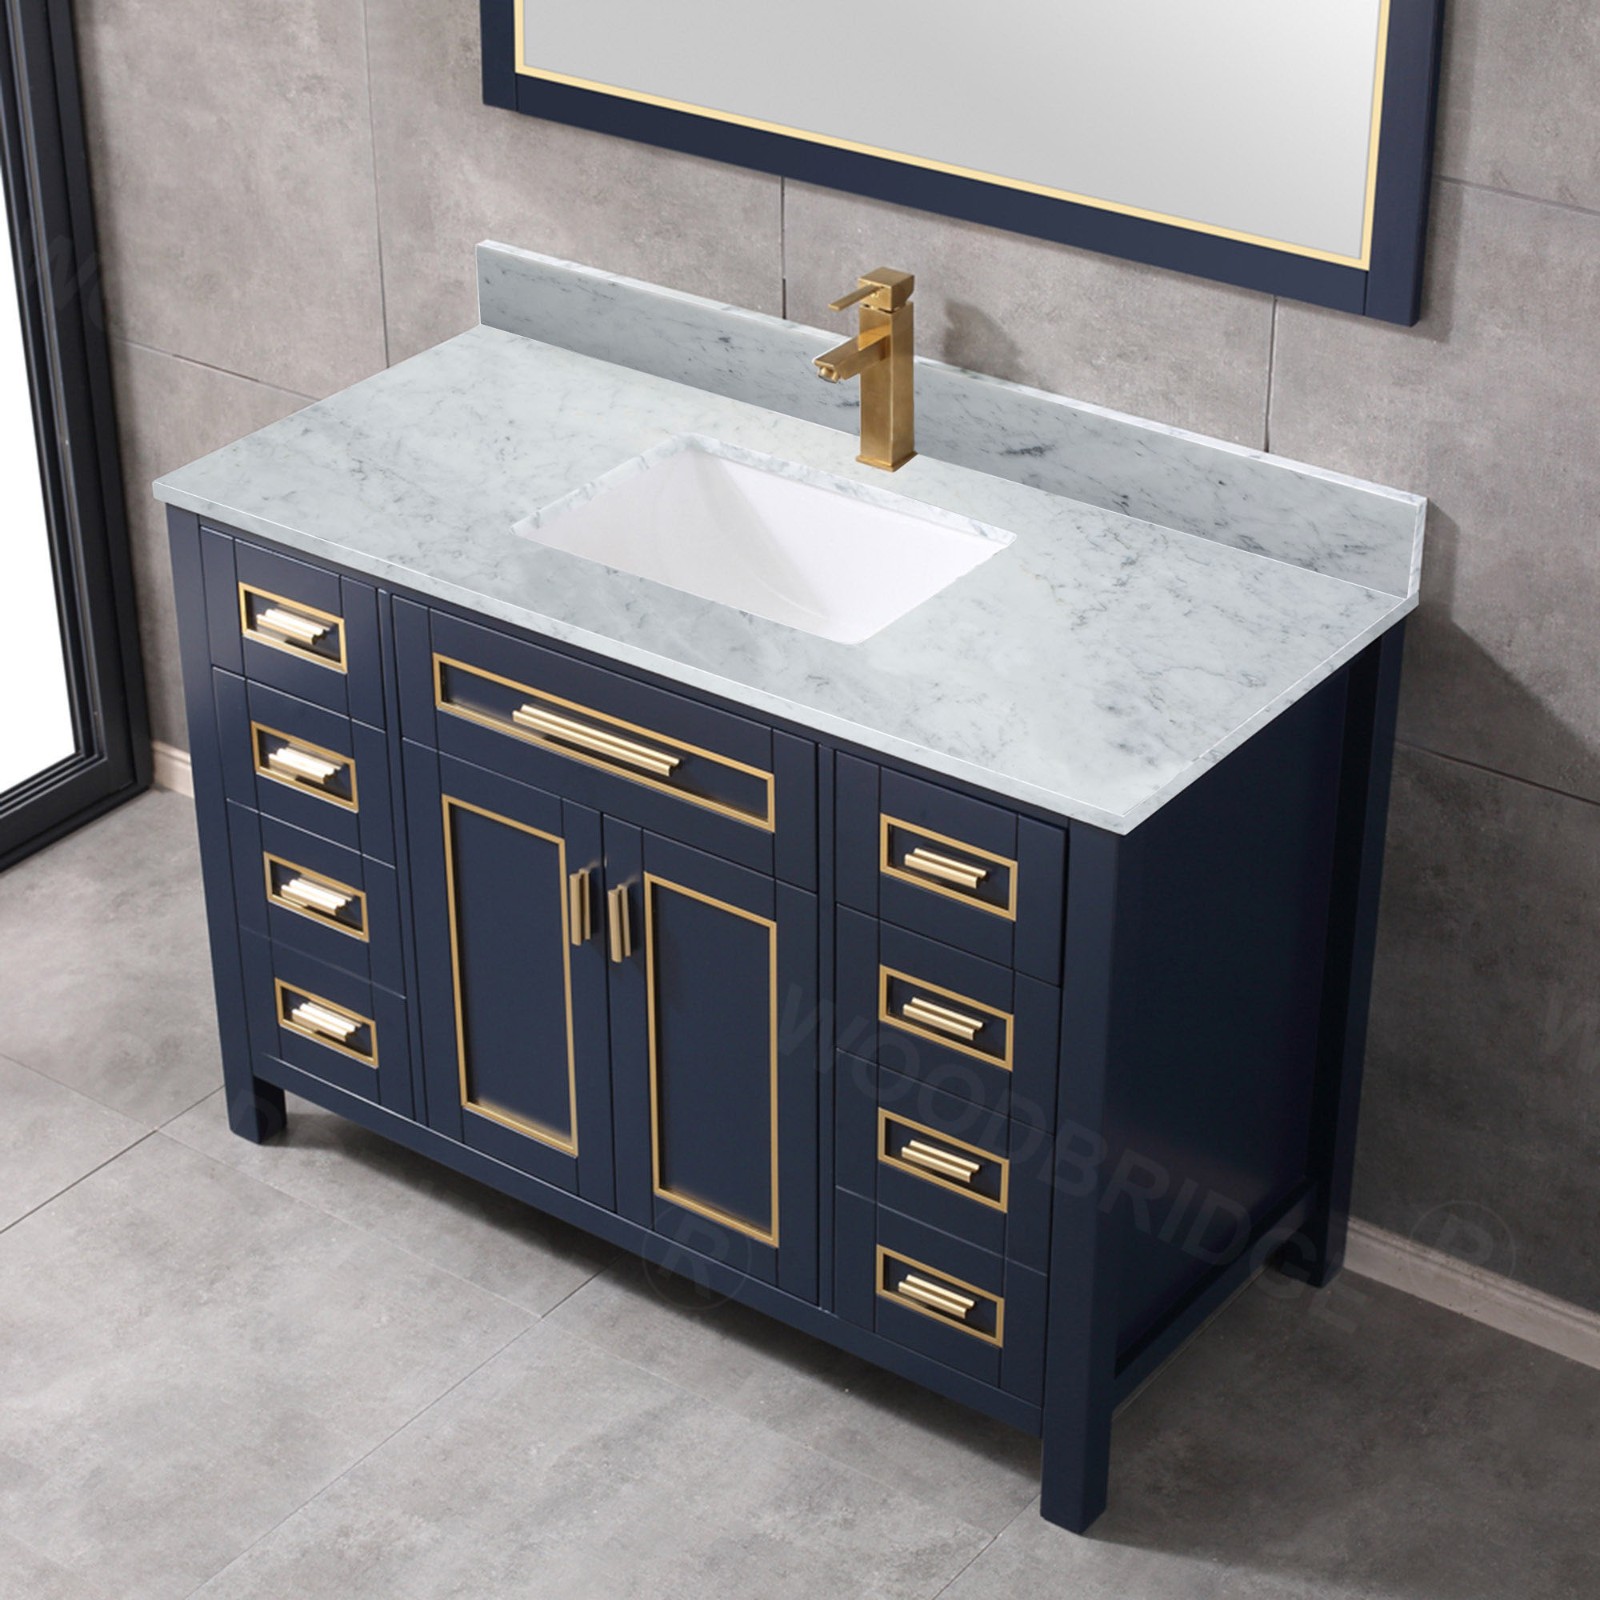  WOODBRIDGE Milan  49” Floor Mounted Single Basin Vanity Set with Solid Wood Cabinet in Navy Blue, and Carrara White Marble Vanity Top with Pre-installed Undermount Rectangle Bathroom Sink in White, Pre-Drilled Single Faucet Hole_4745